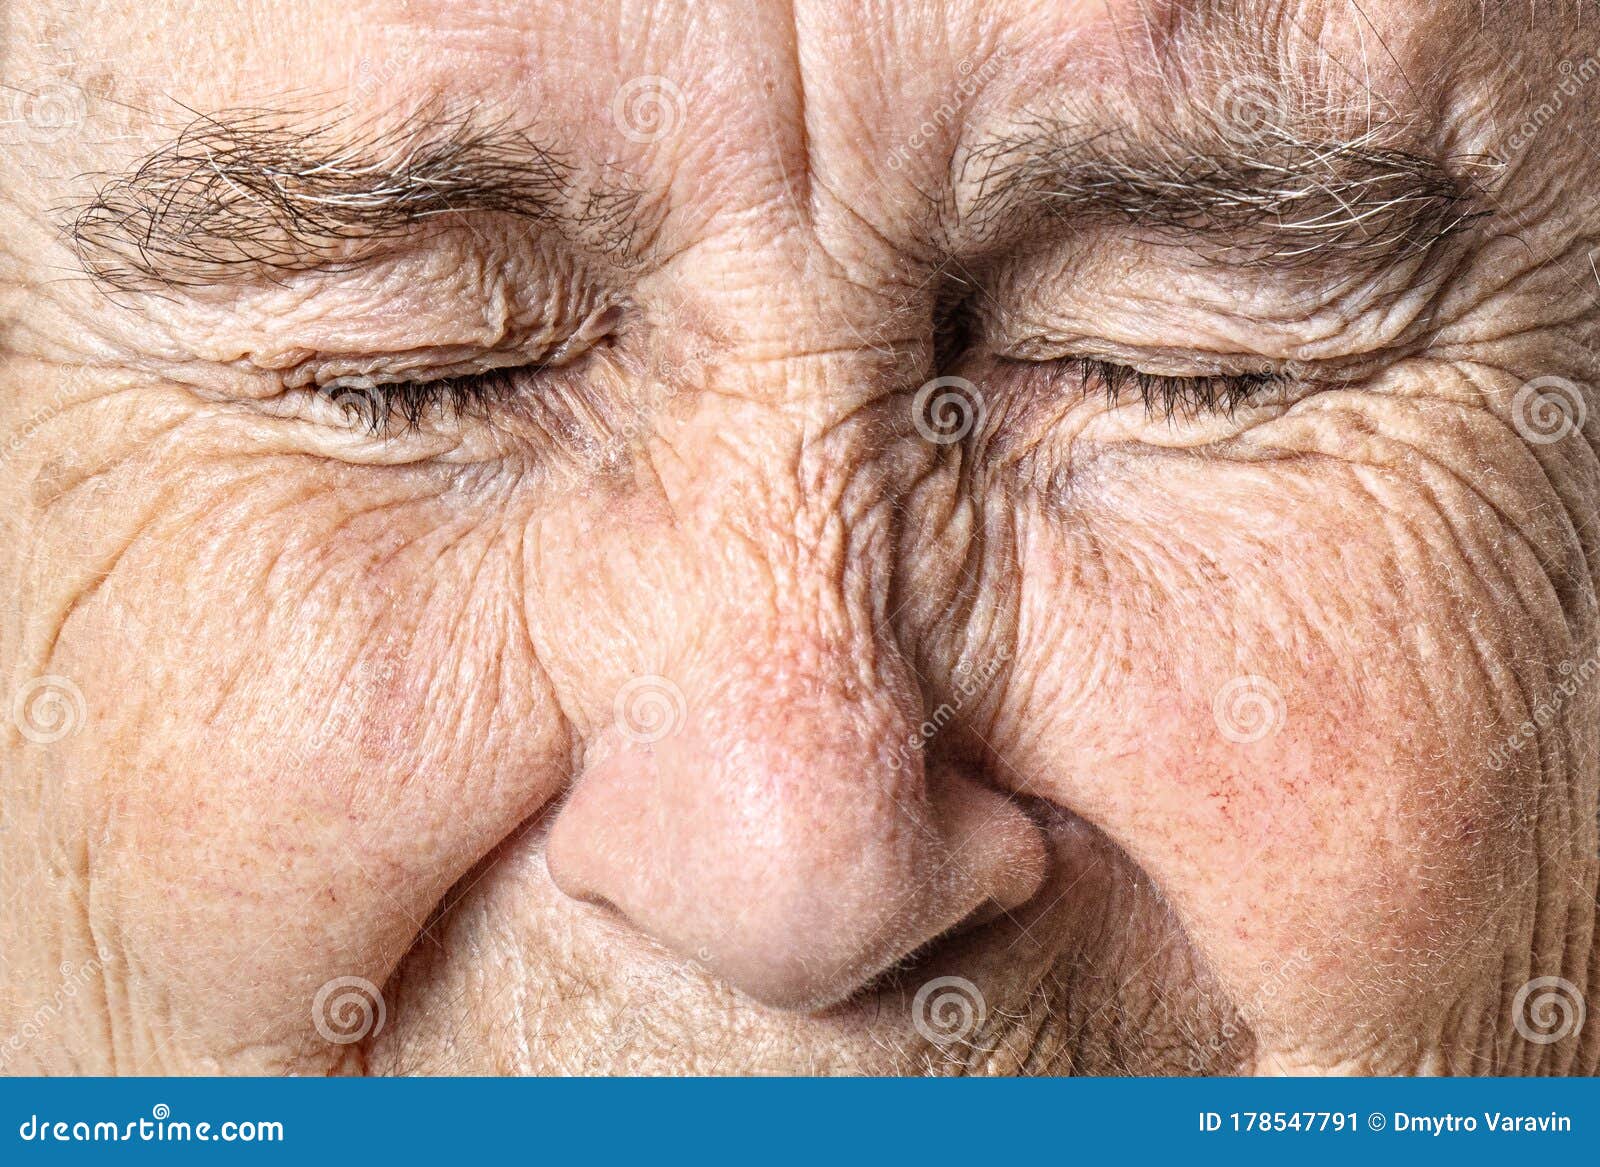 Wrinkled Old Face Close Up Portrait Of An Old Woman With Closed Eyes